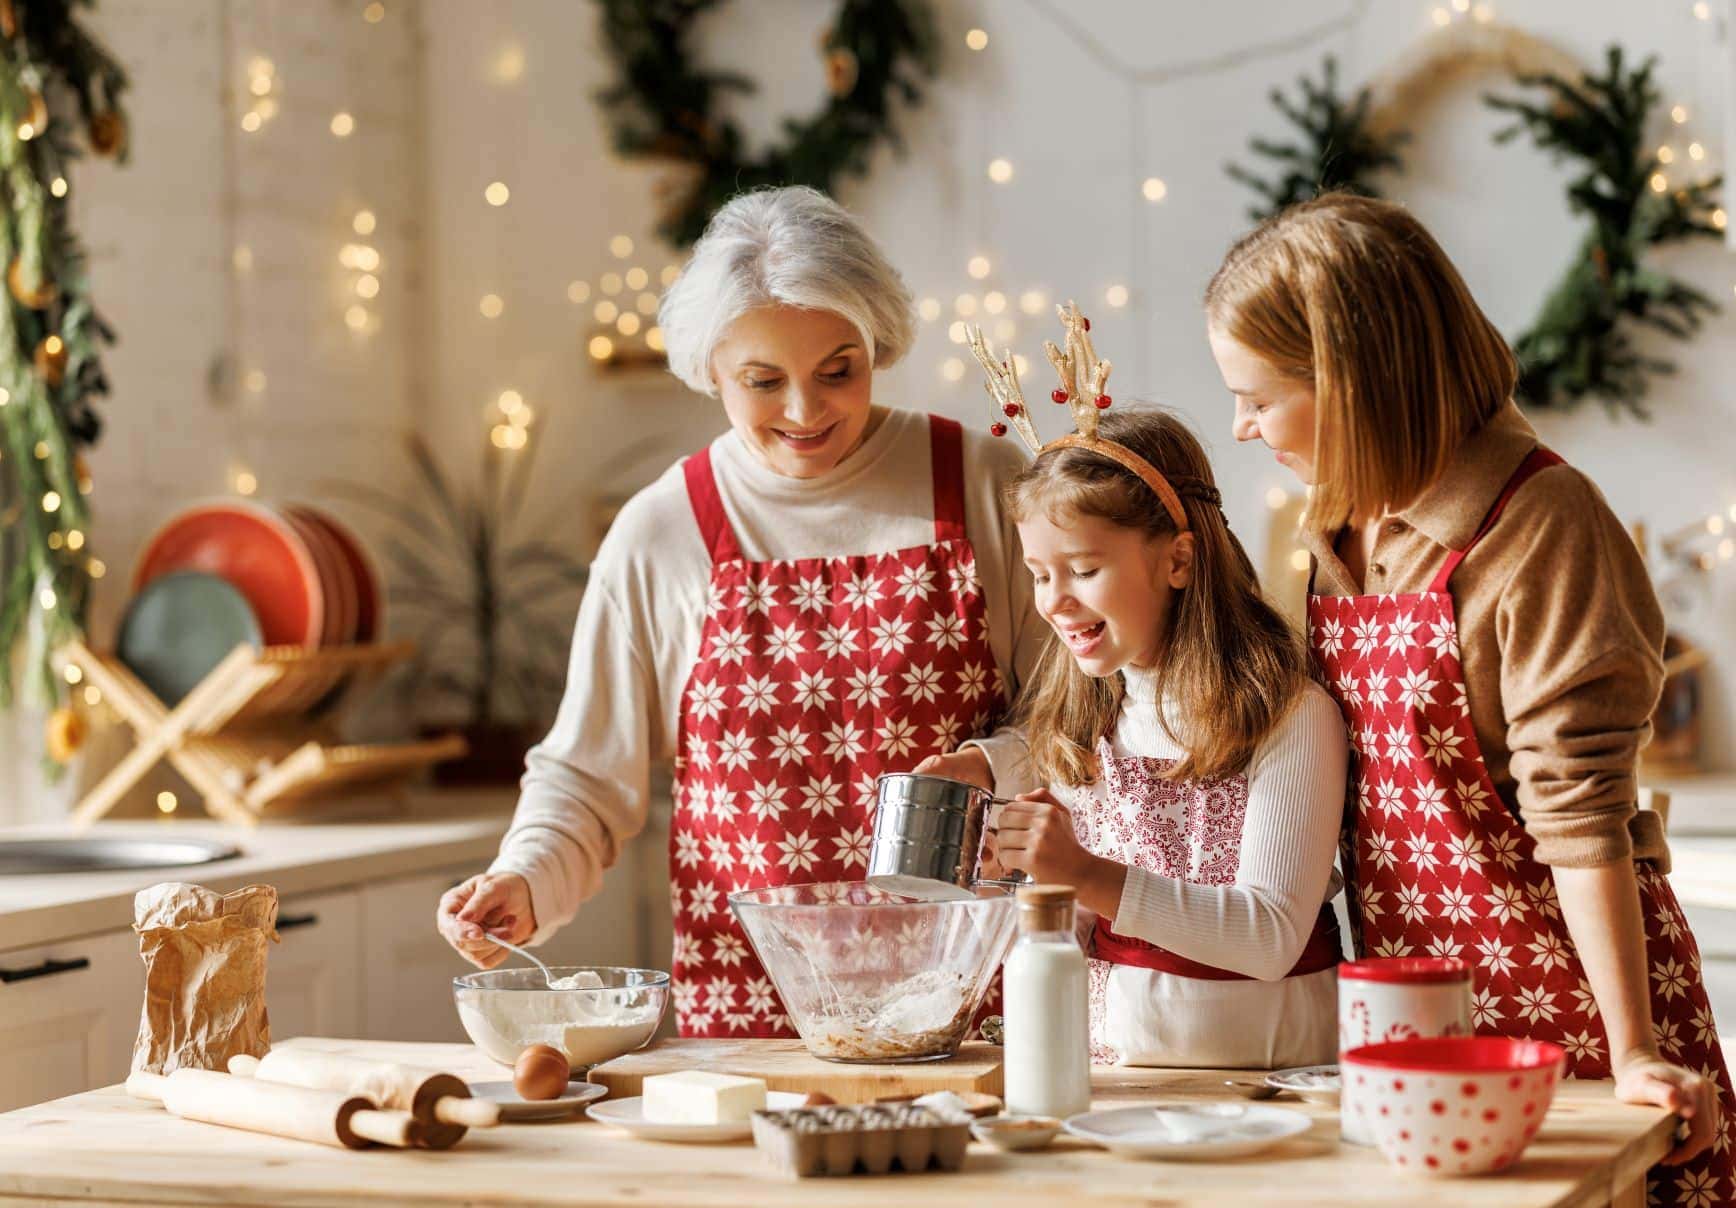 elderly woman, adult woman, and young girl making cookies together